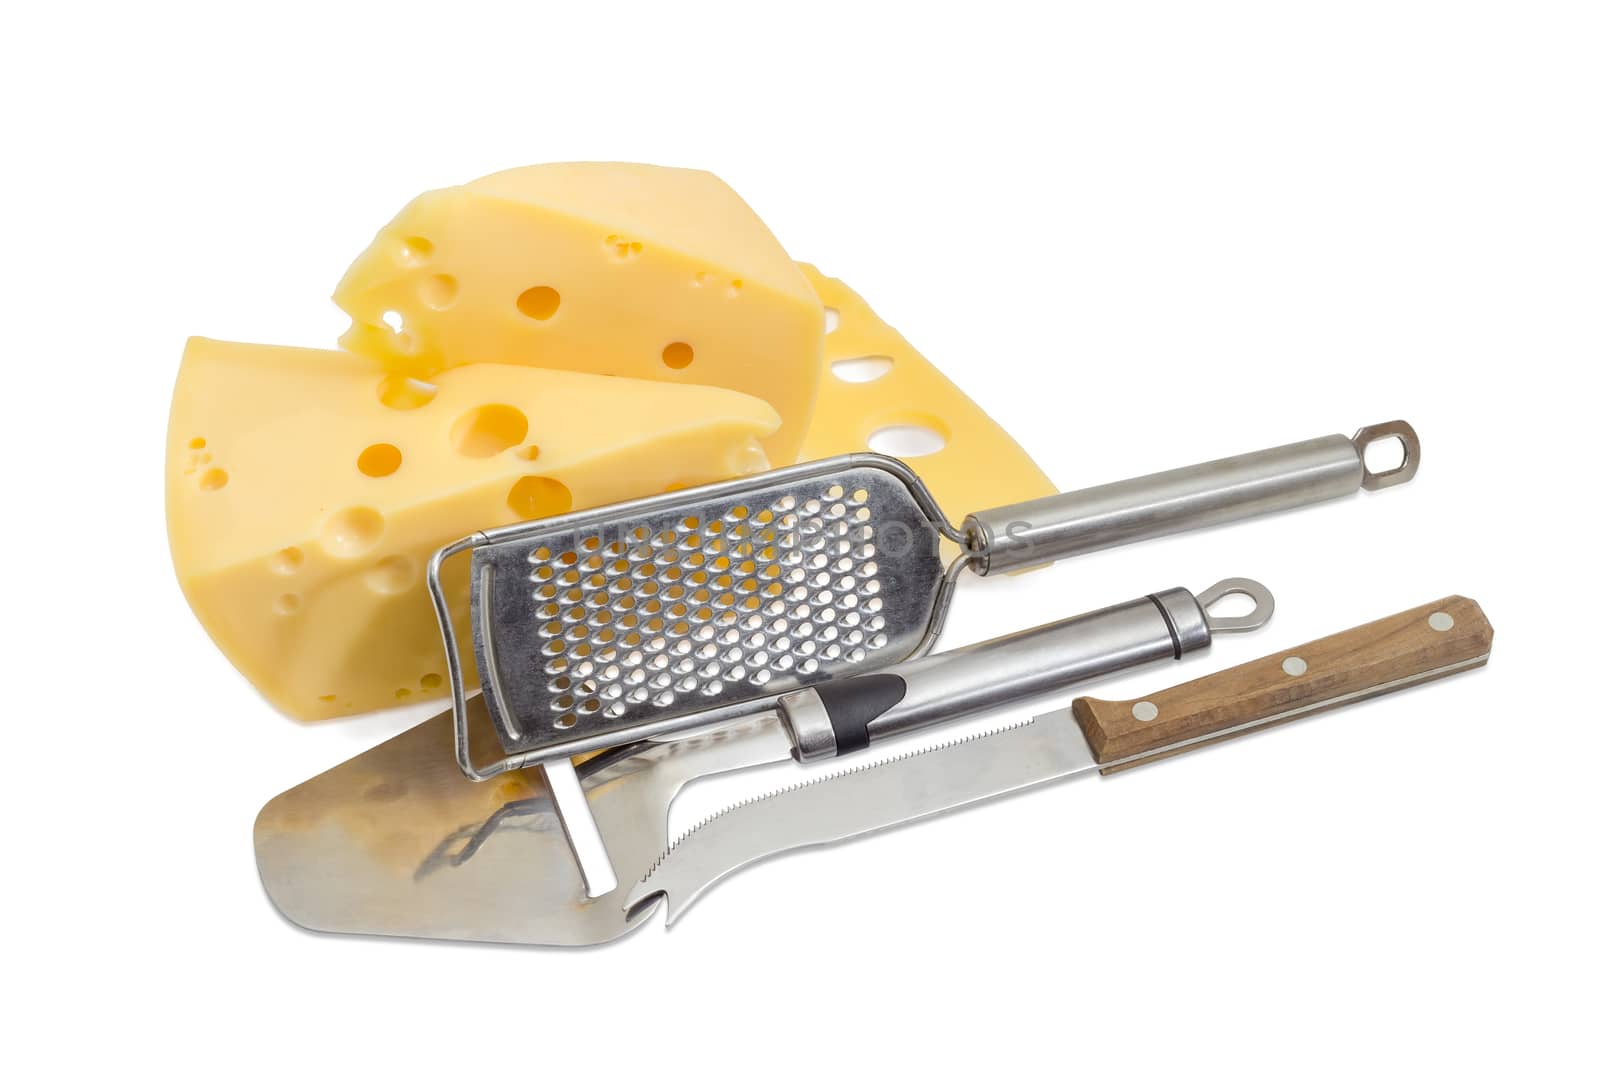 Cheese knife, cheese slicer, cheese grater against the background of the pieces semi-hard Swiss-type cheese on a light background
